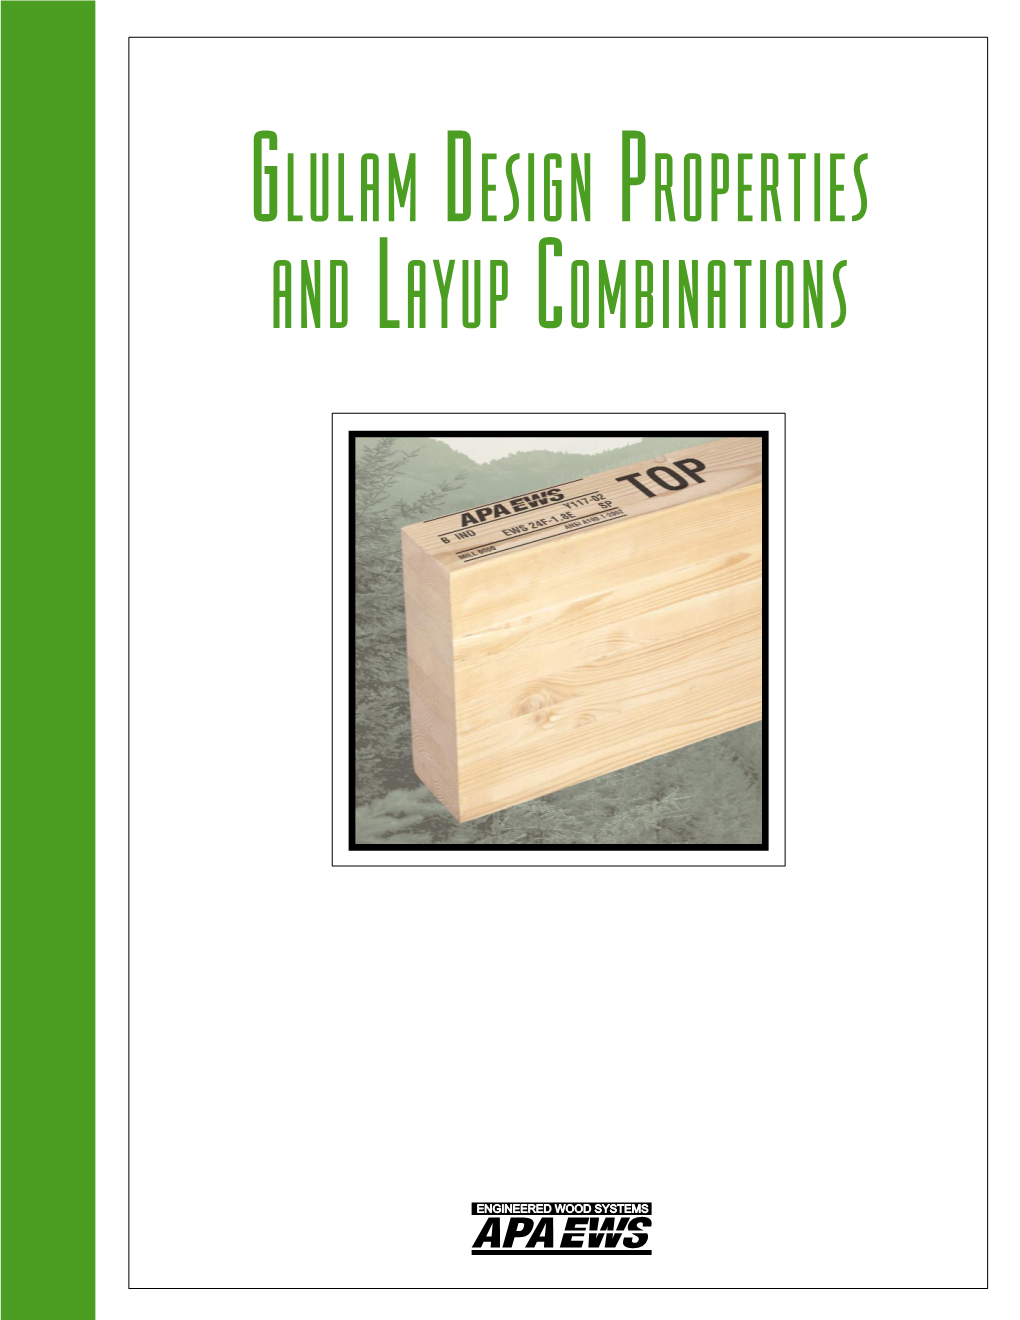 Glulam Design Properties and Layup Combinations